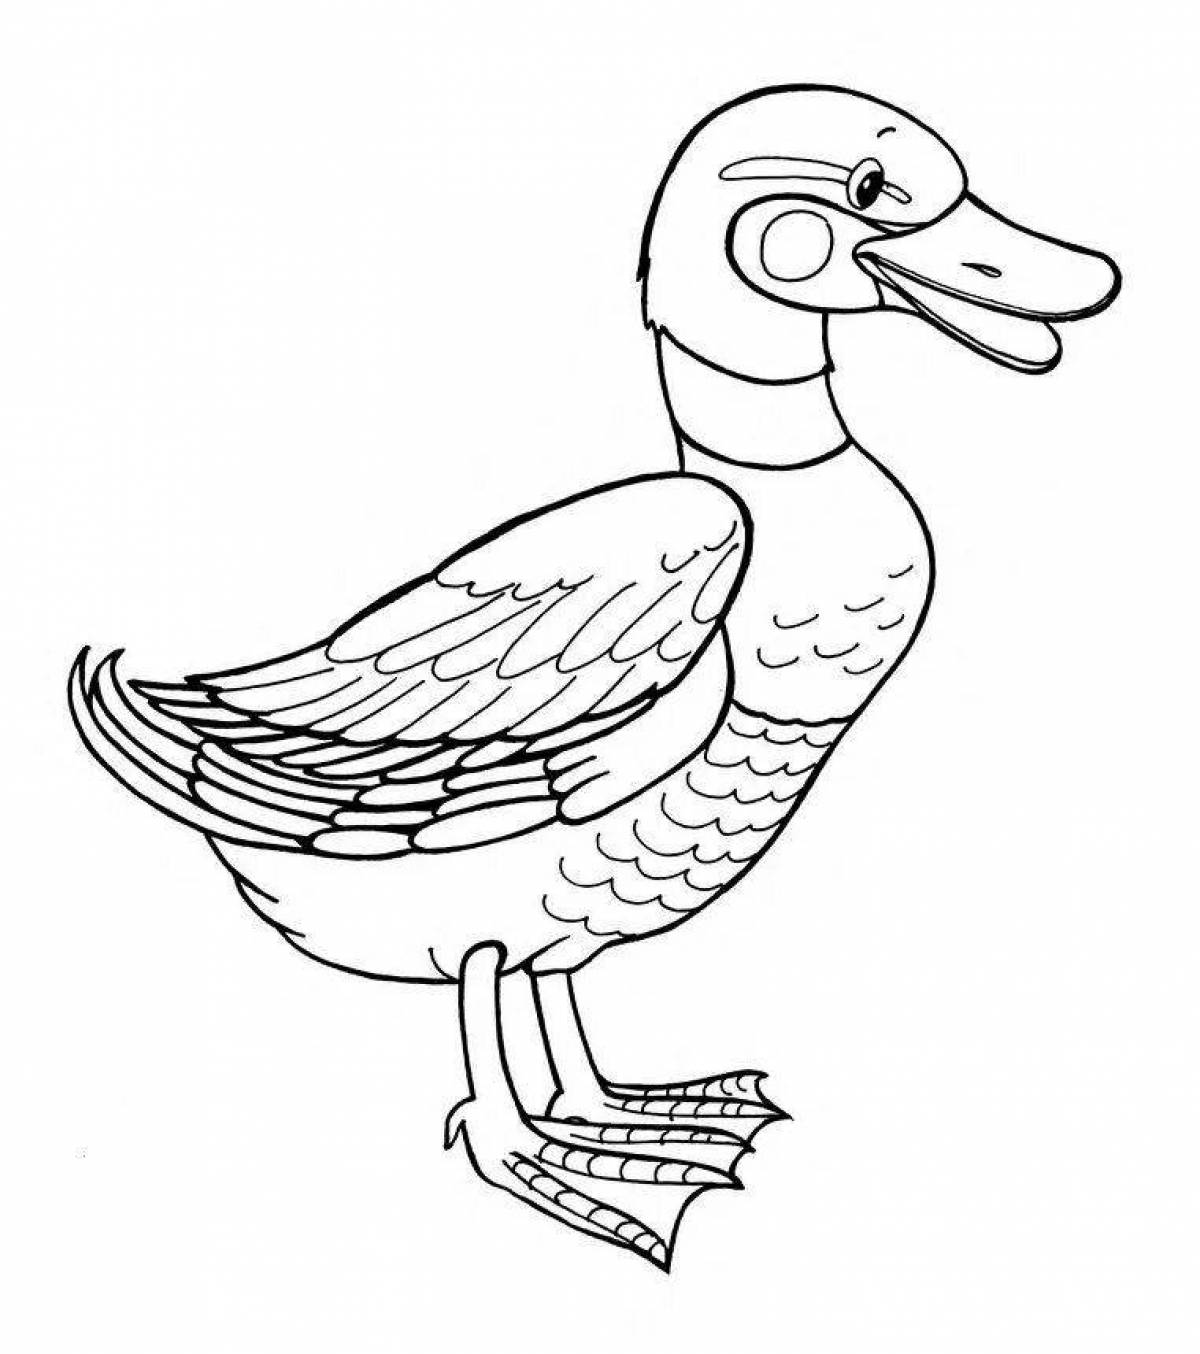 The amazing lanfan duck coloring book